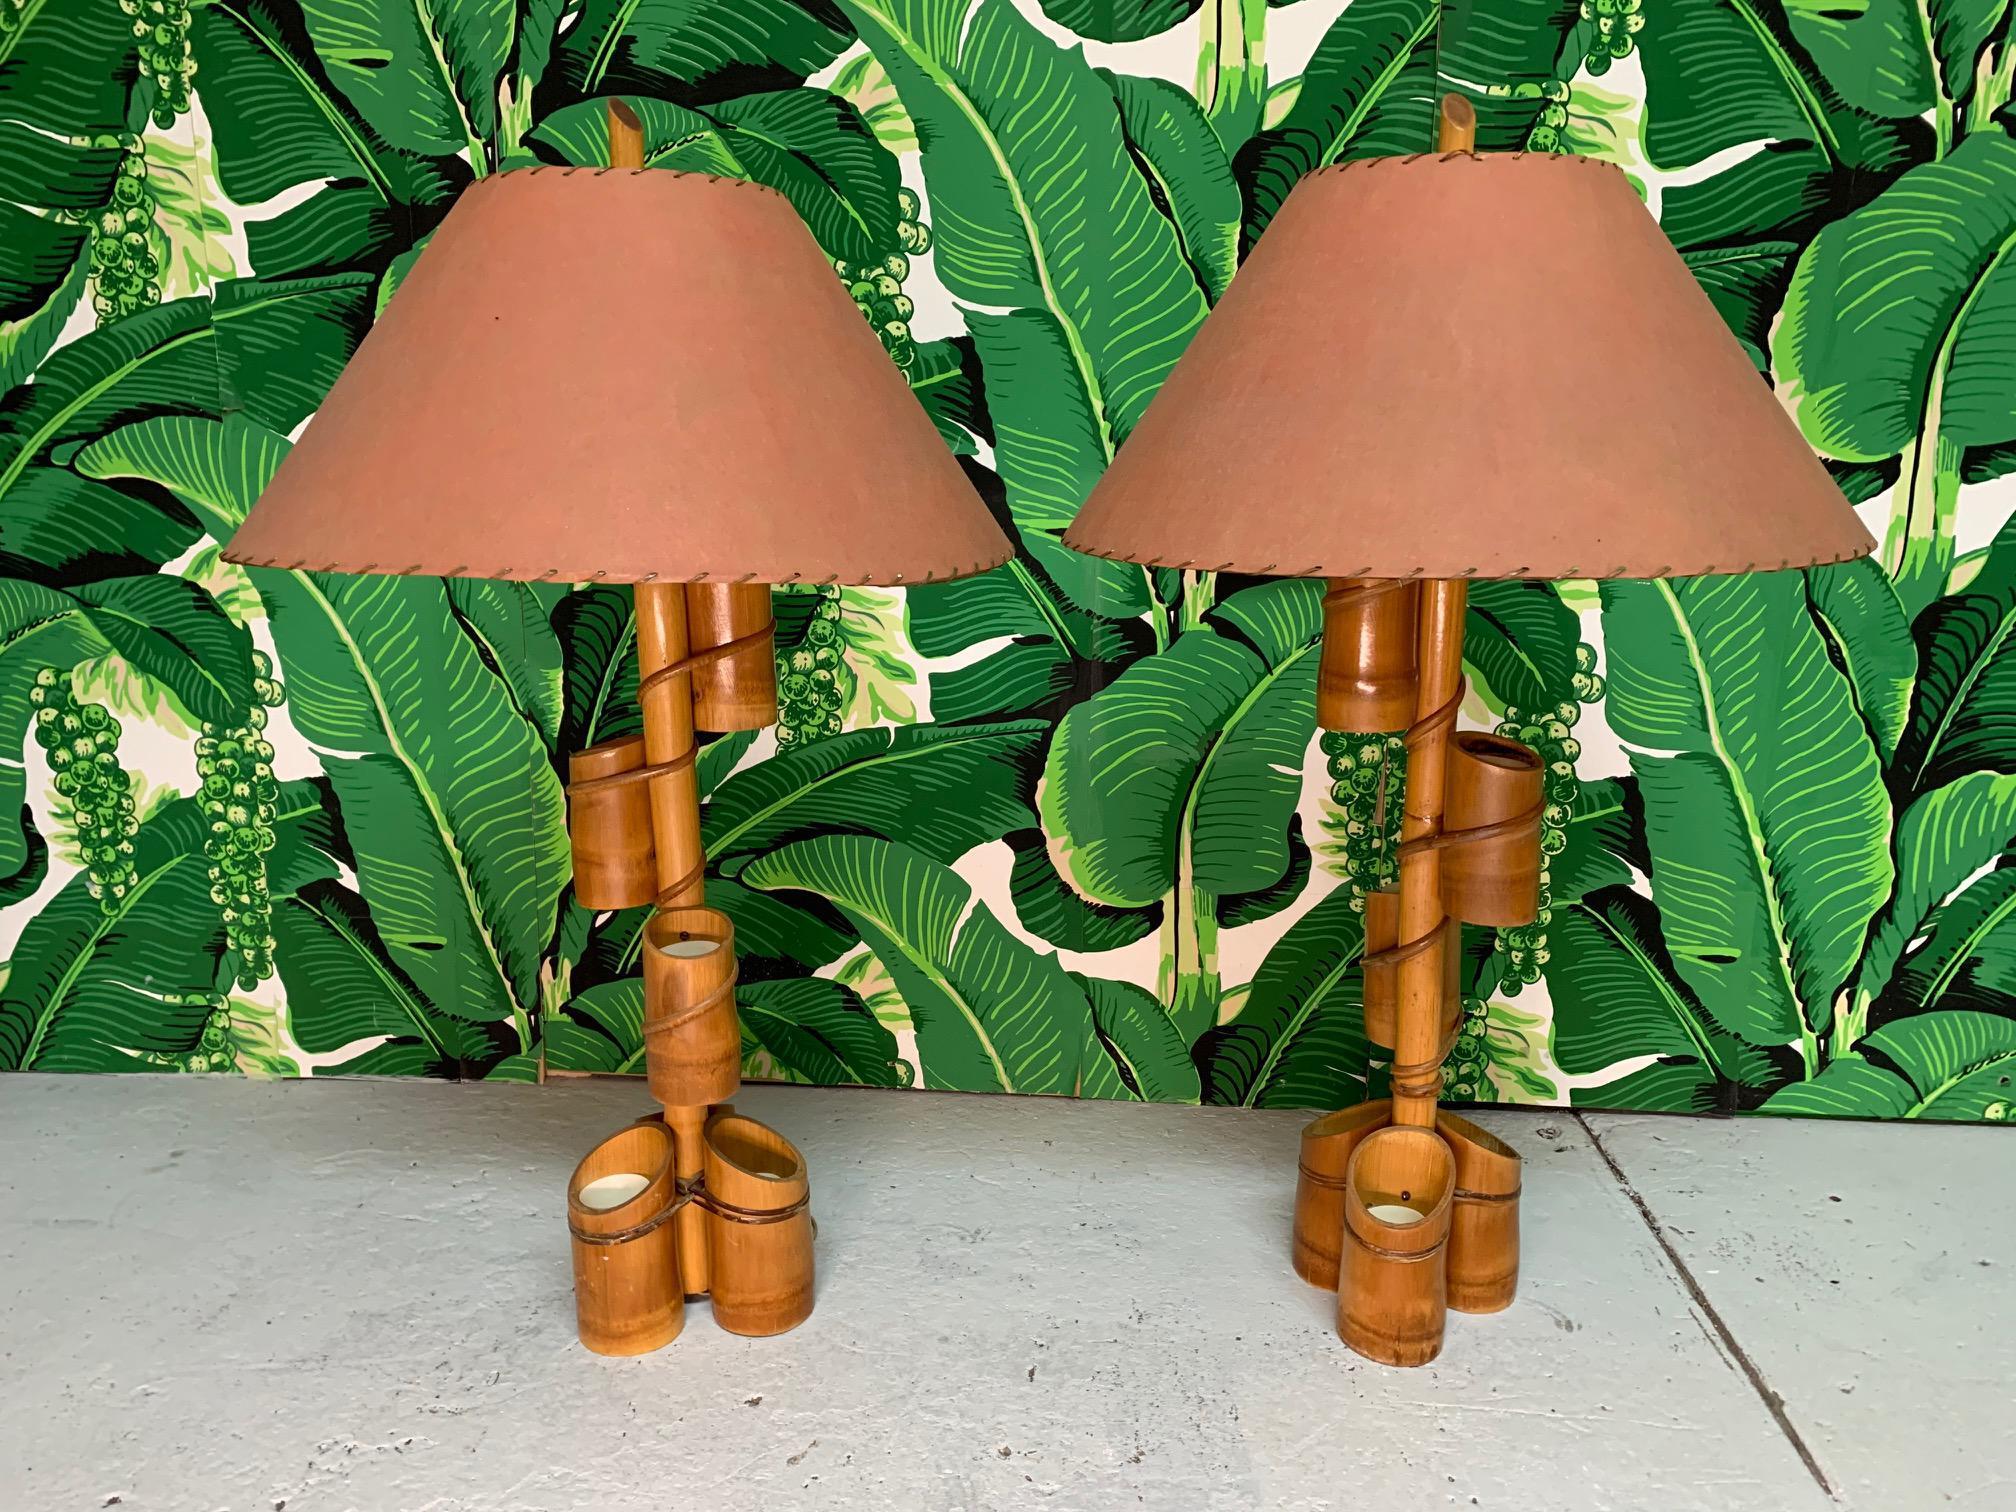 Pair of 1950's Tiki style table lamps feature a bamboo body and fiberglass parchment shades. The main shaft is adorned with small bamboo planters with plastic inserts, perfect for succulents or small bright flowers. Very good vintage condition with